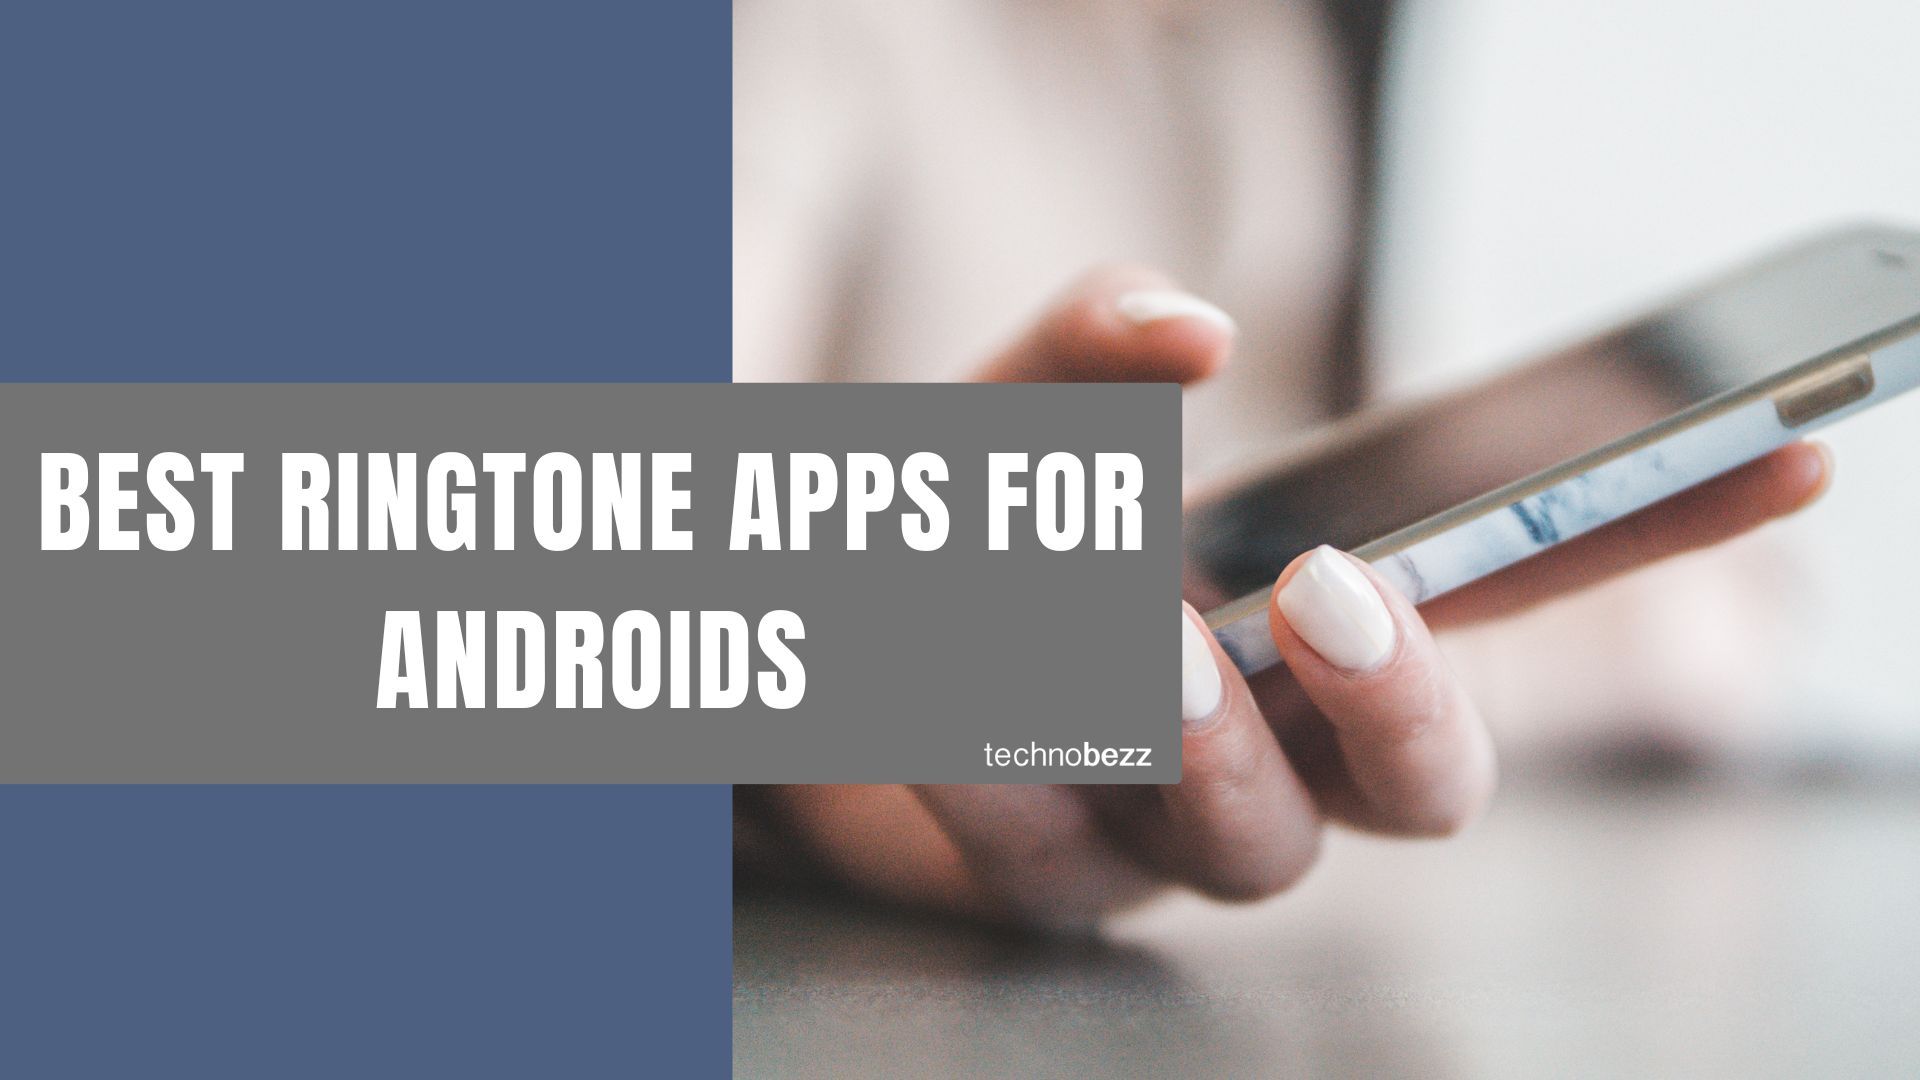 Best Ringtone Apps For Android - Technobezz